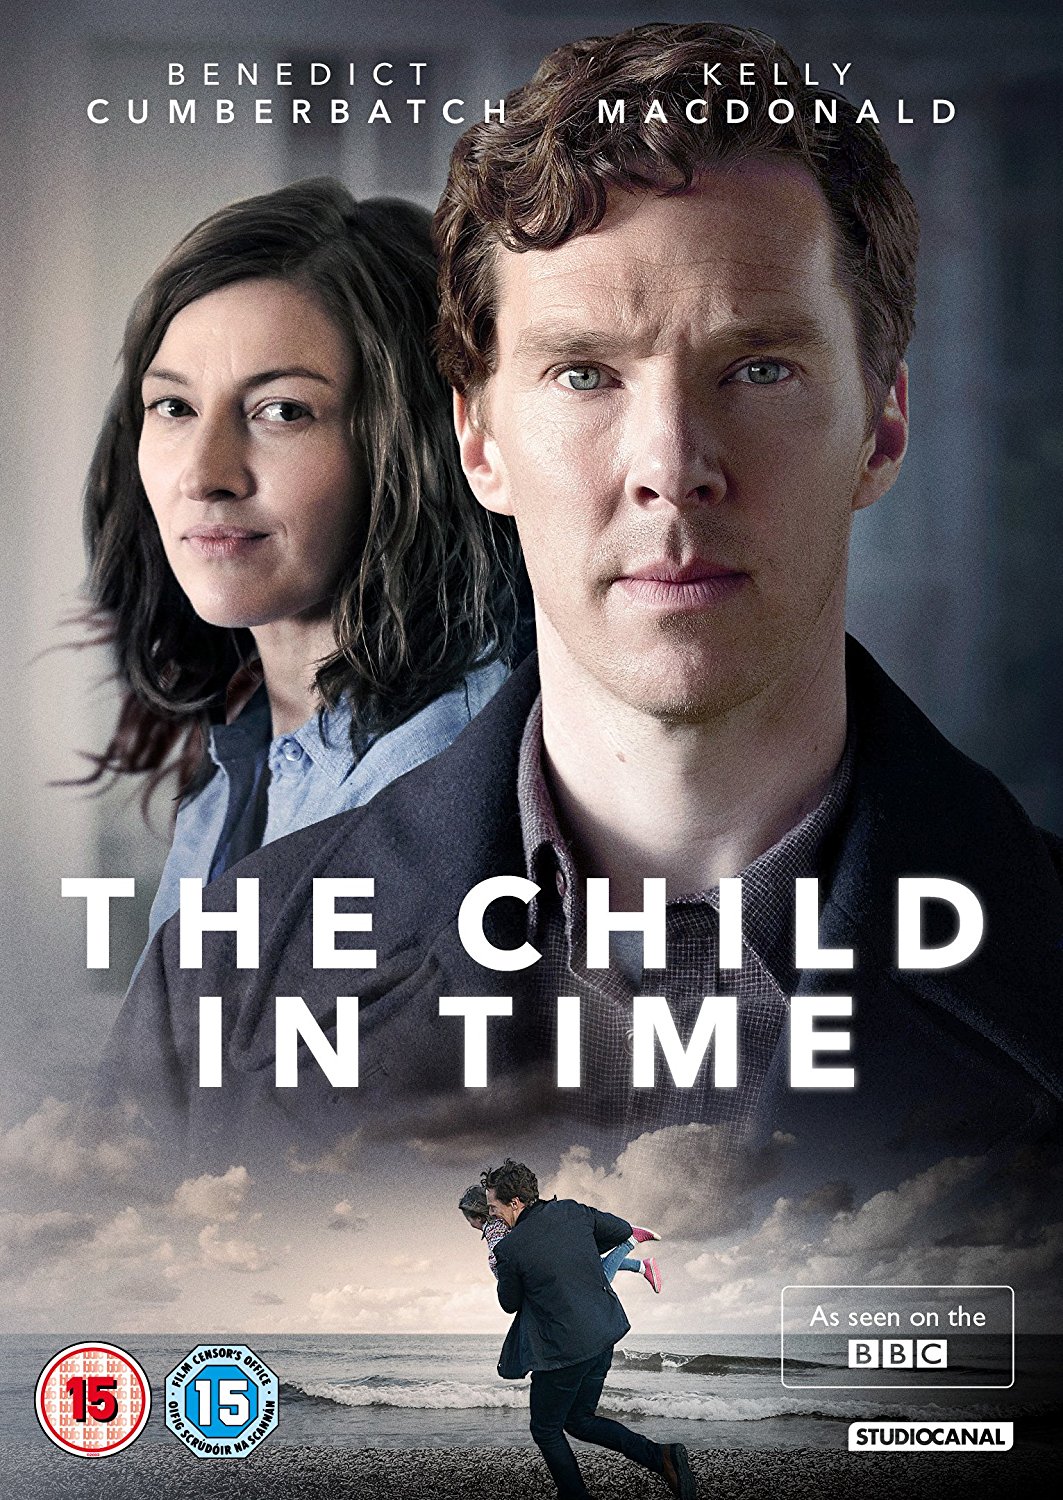 boom competitions - win The Child in Time on DVD